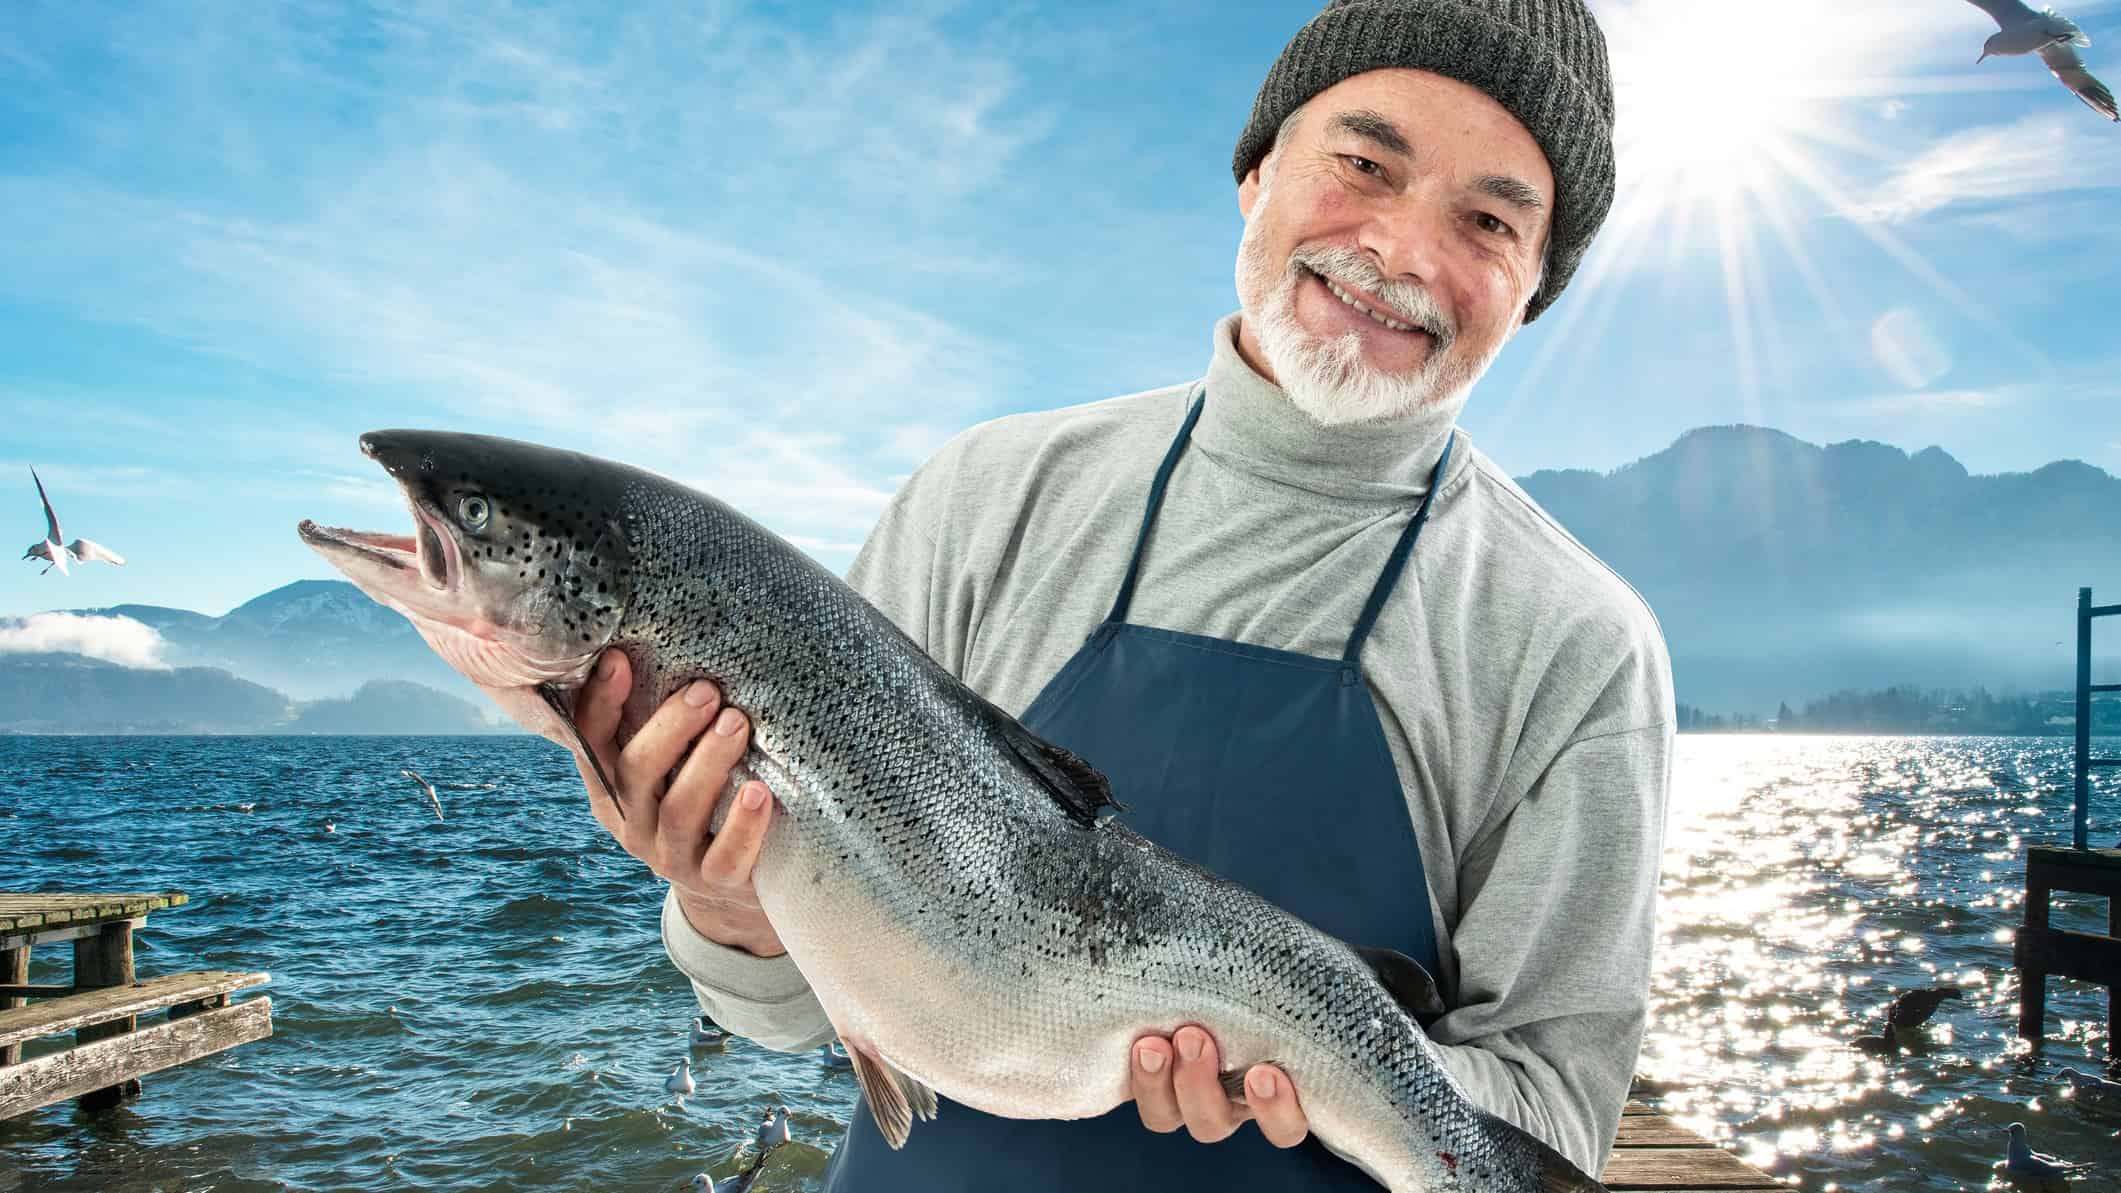 A happy fisherman haldin a large salmon, indicating positive sahre prices news for ASX salmon companies